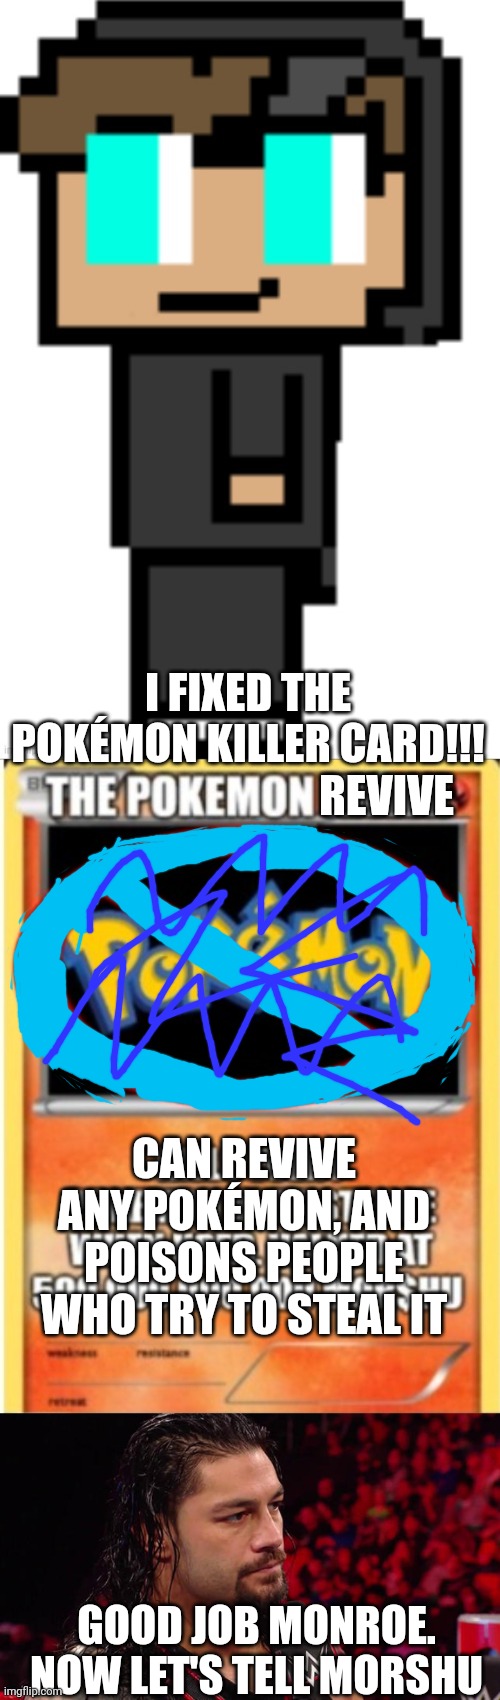 :) | REVIVE; I FIXED THE POKÉMON KILLER CARD!!! CAN REVIVE ANY POKÉMON, AND POISONS PEOPLE WHO TRY TO STEAL IT; GOOD JOB MONROE. NOW LET'S TELL MORSHU | image tagged in memes | made w/ Imgflip meme maker